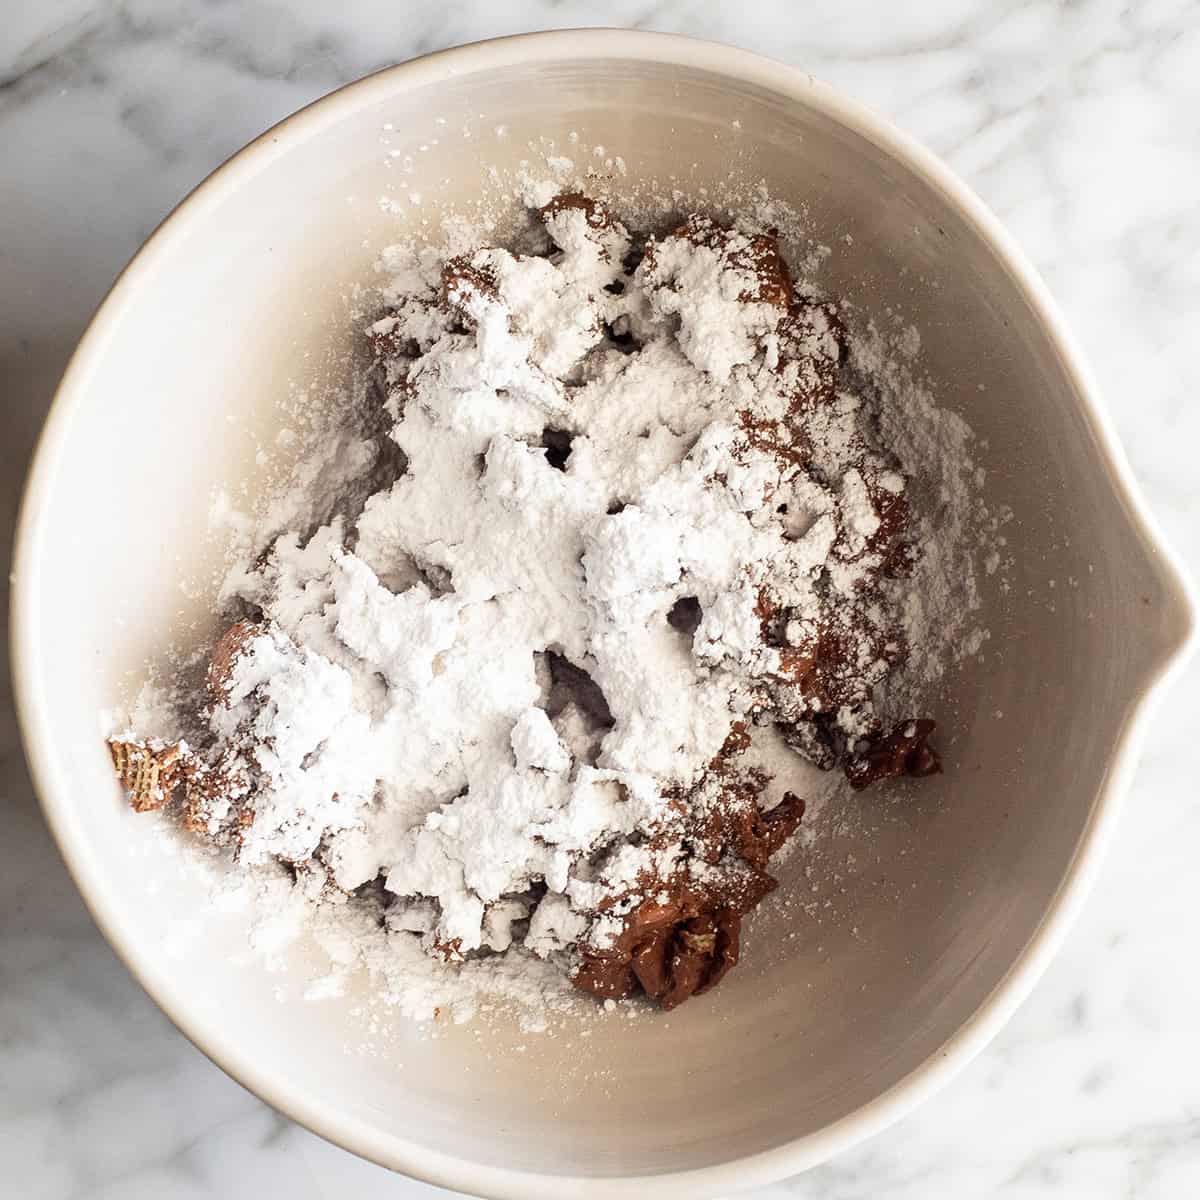 How to Make Puppy Chow - adding powdered sugar to the chocolate coated cereal